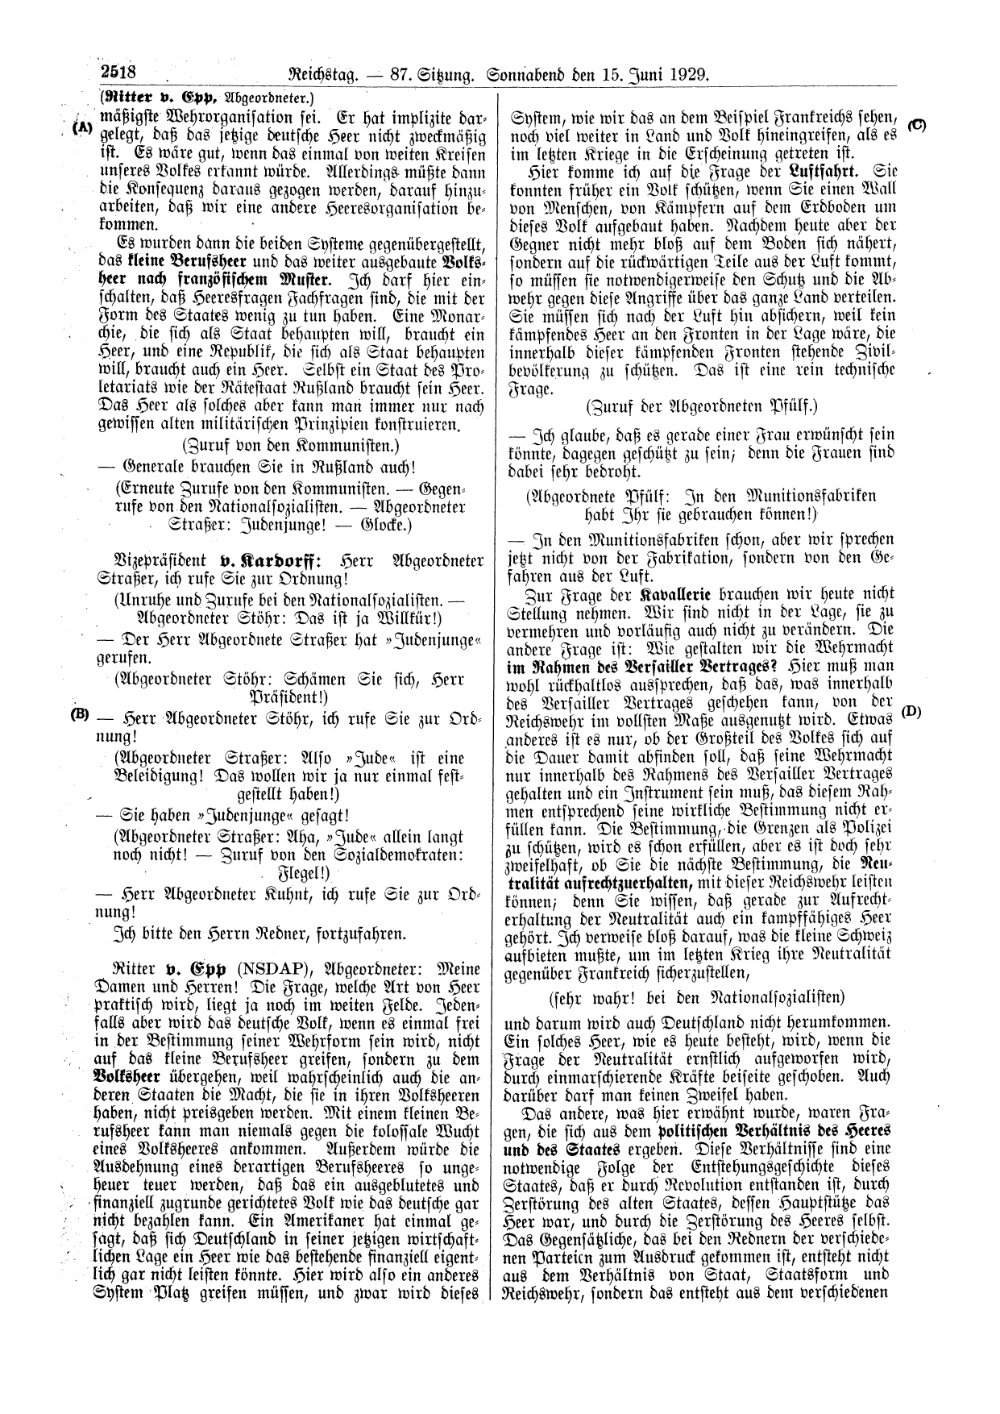 Scan of page 2518